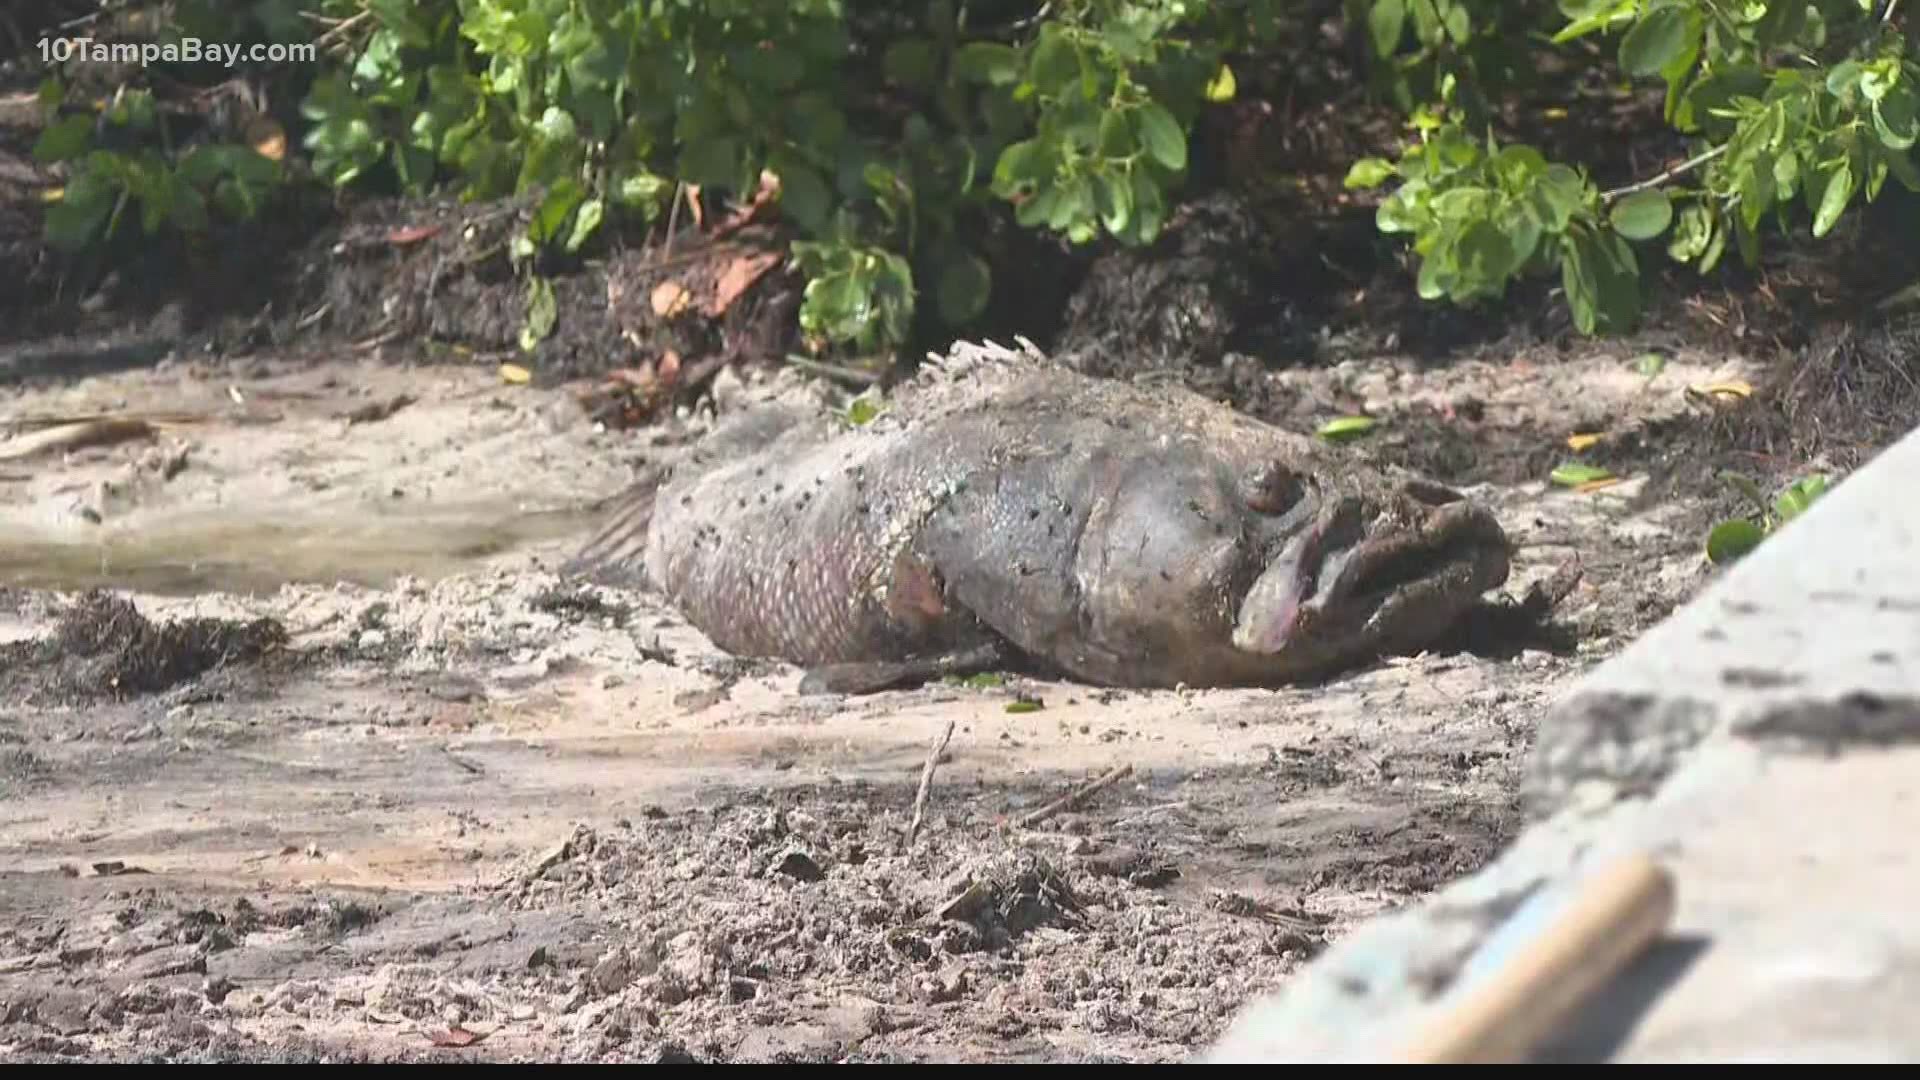 People living in Pinellas County are seeing sea life die from red tide and want action taken.